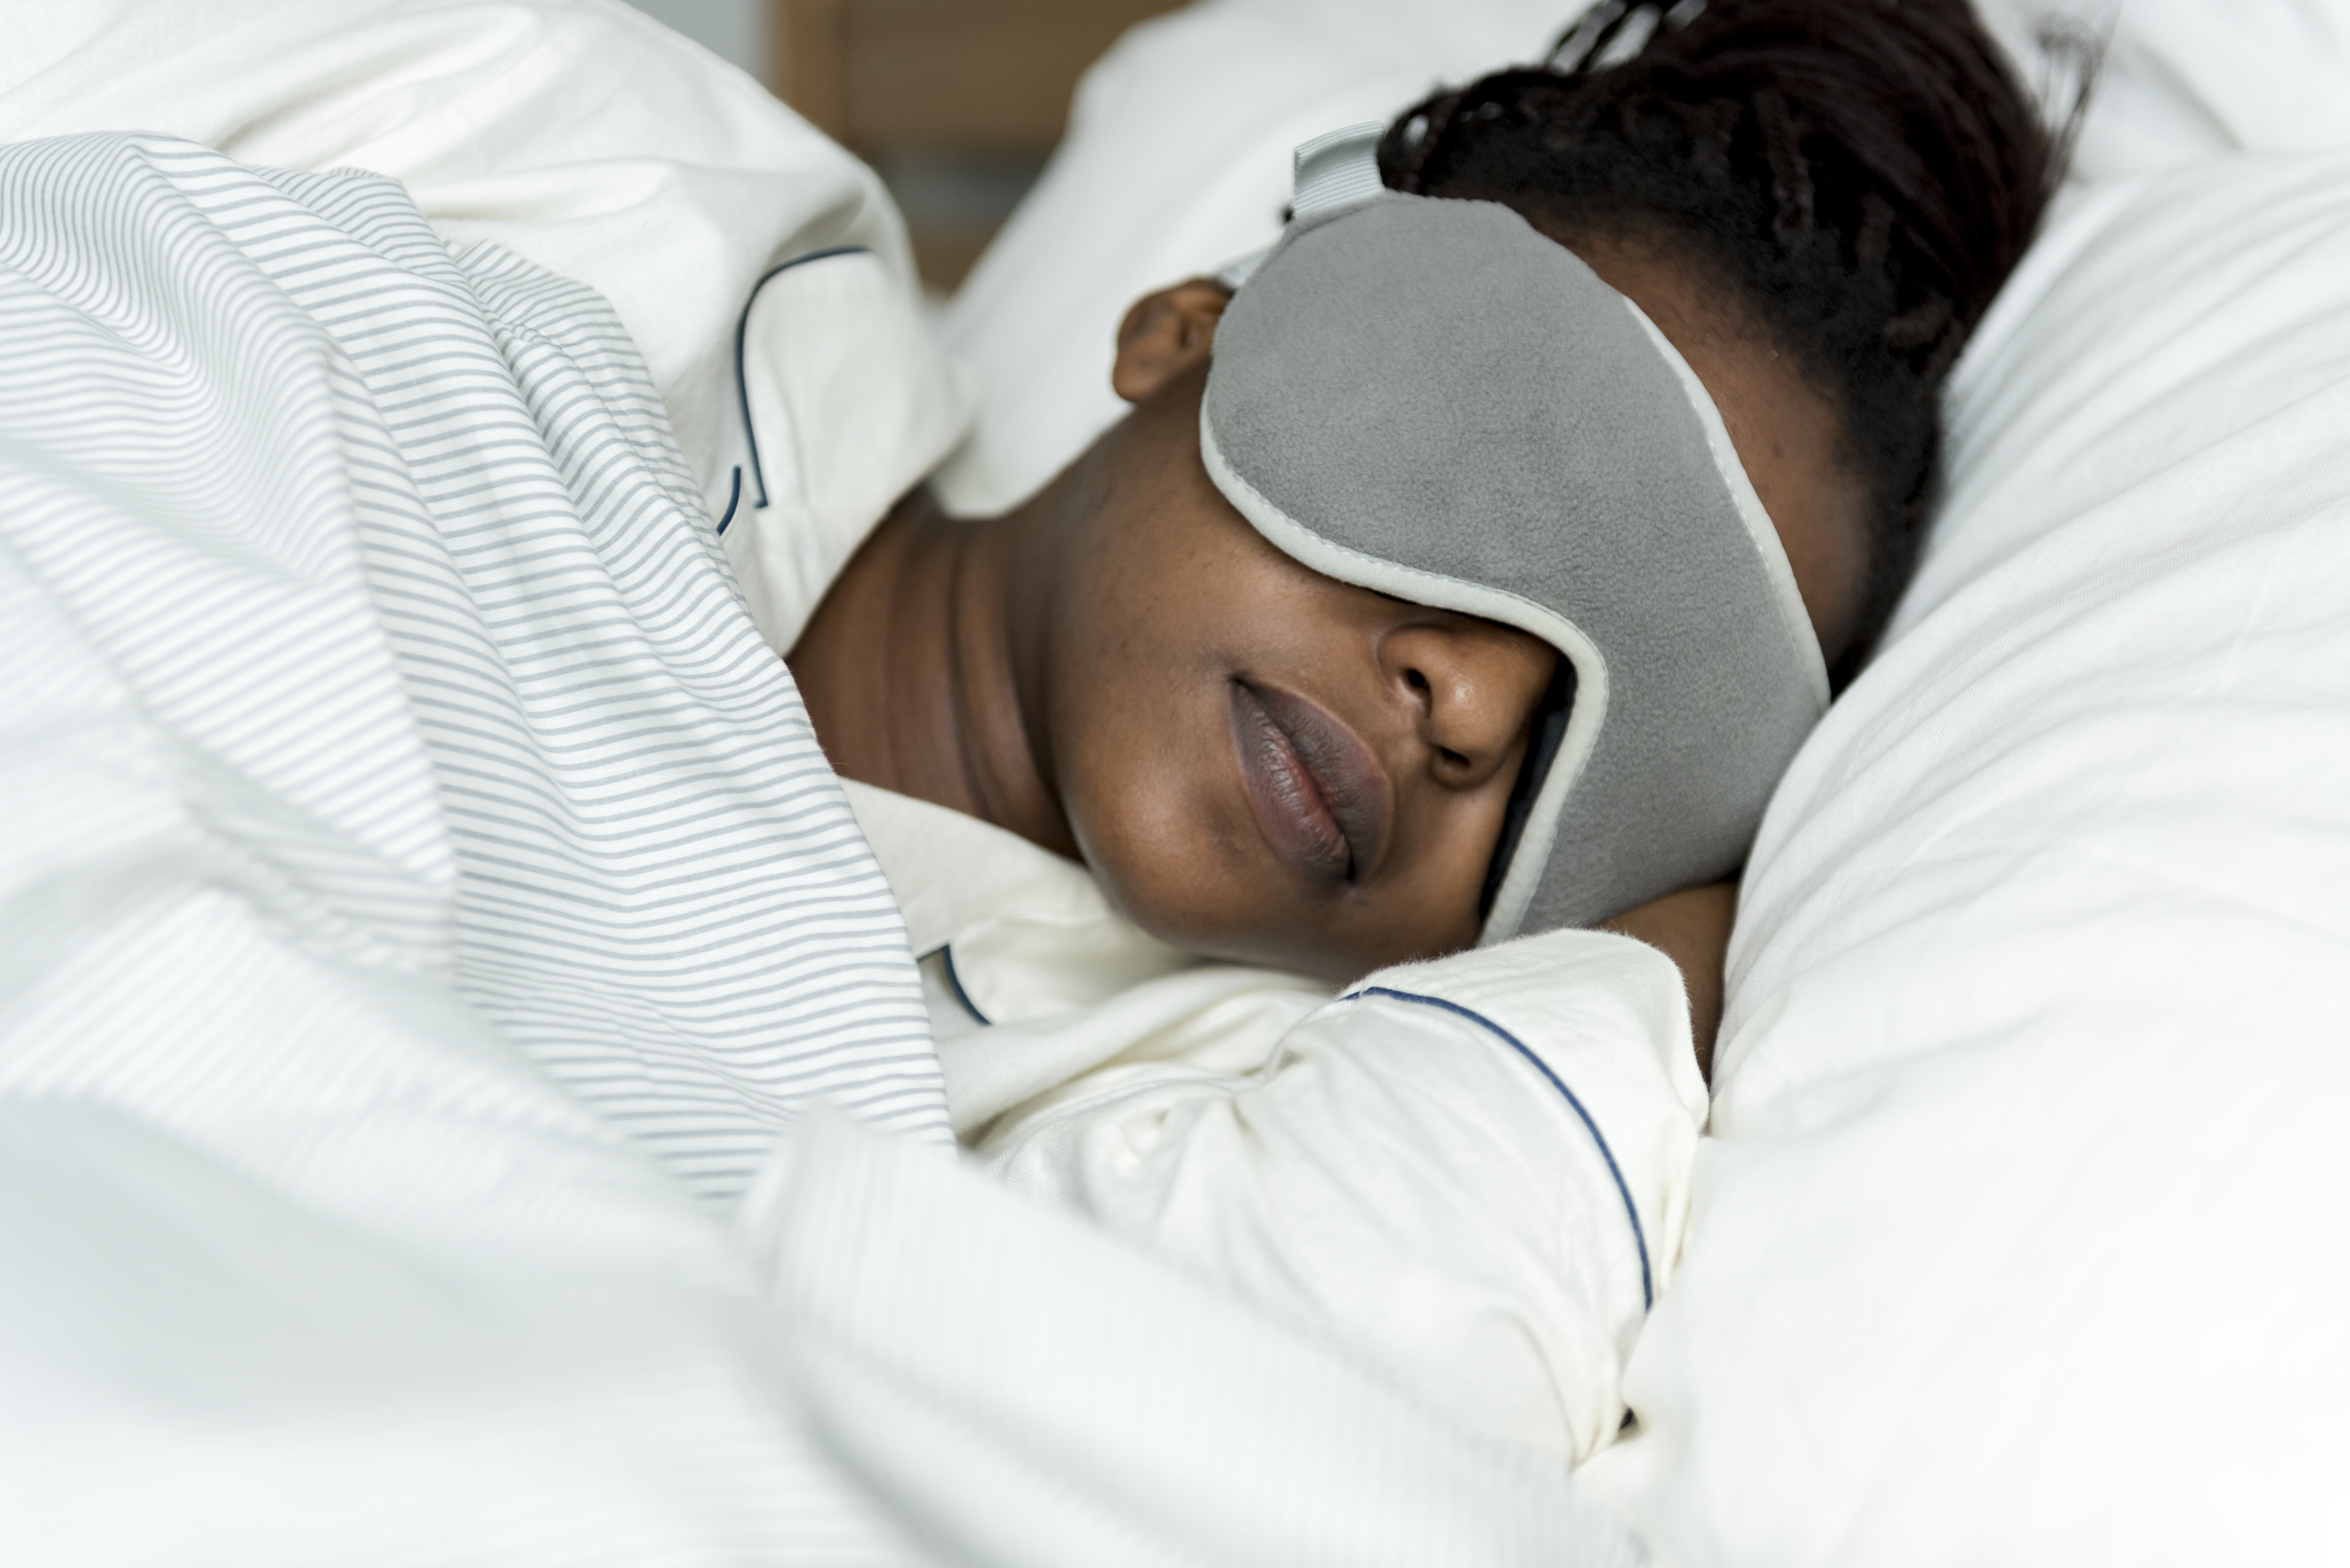 How to Screen for Sleep Breathing Disorders